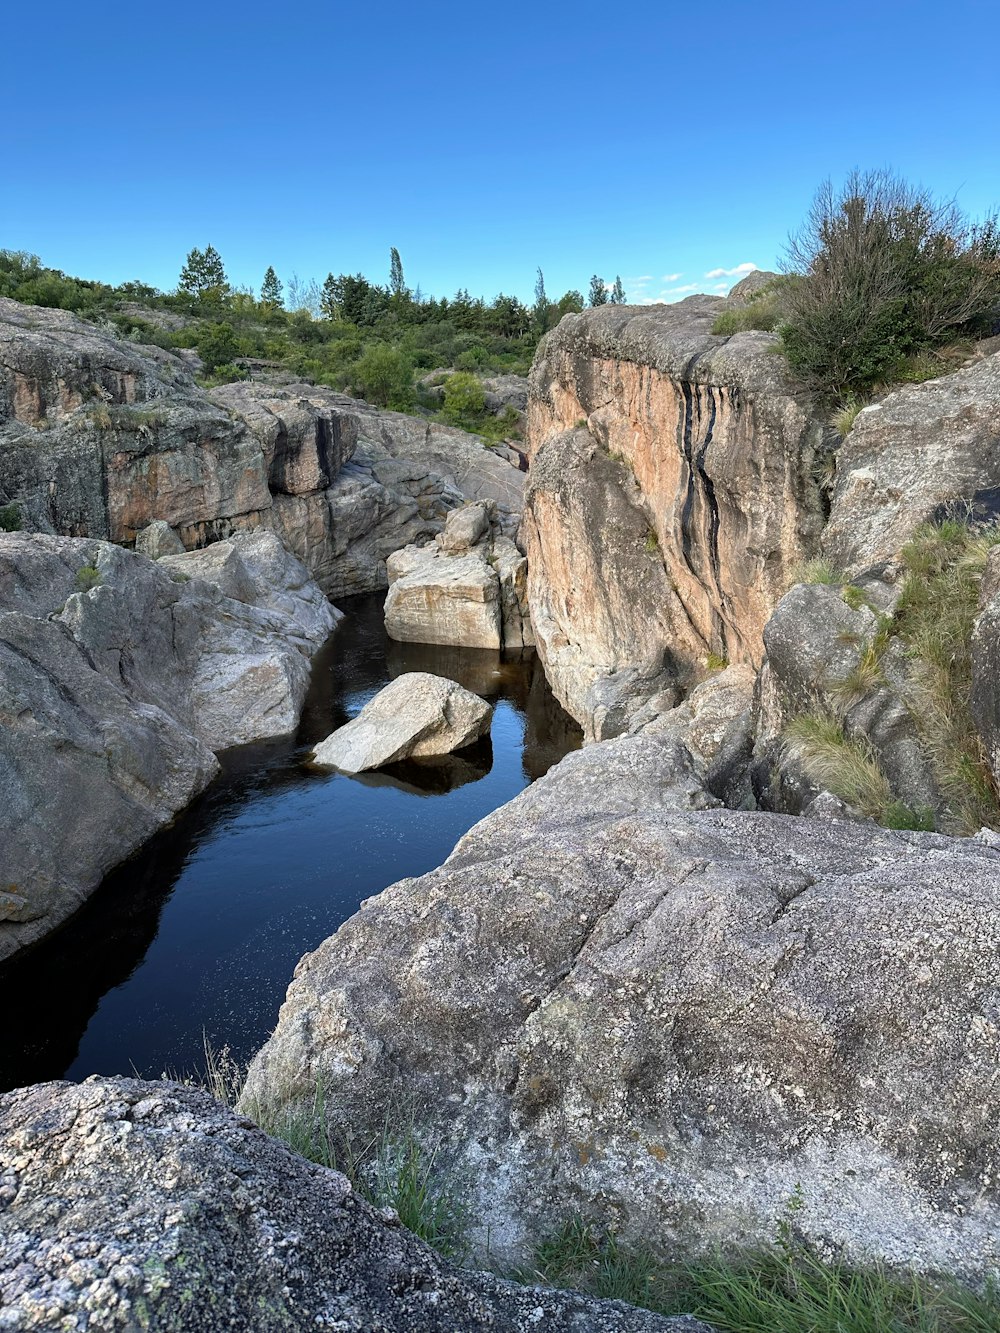 a small pool of water surrounded by large rocks